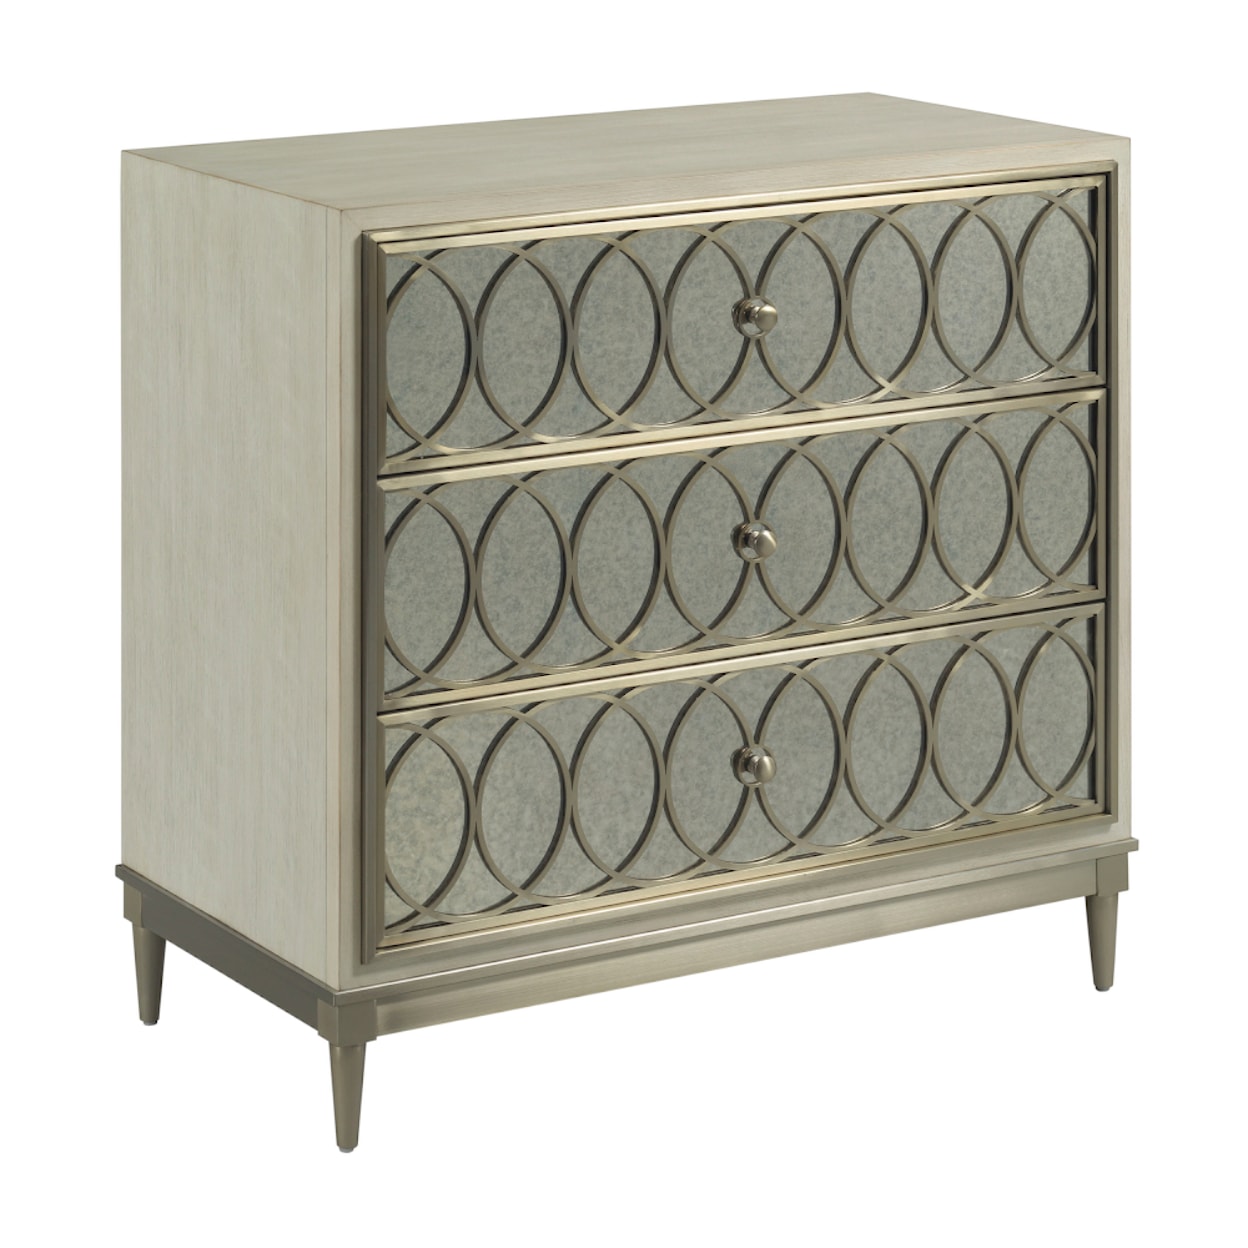 Hammary Galerie Accent Chests